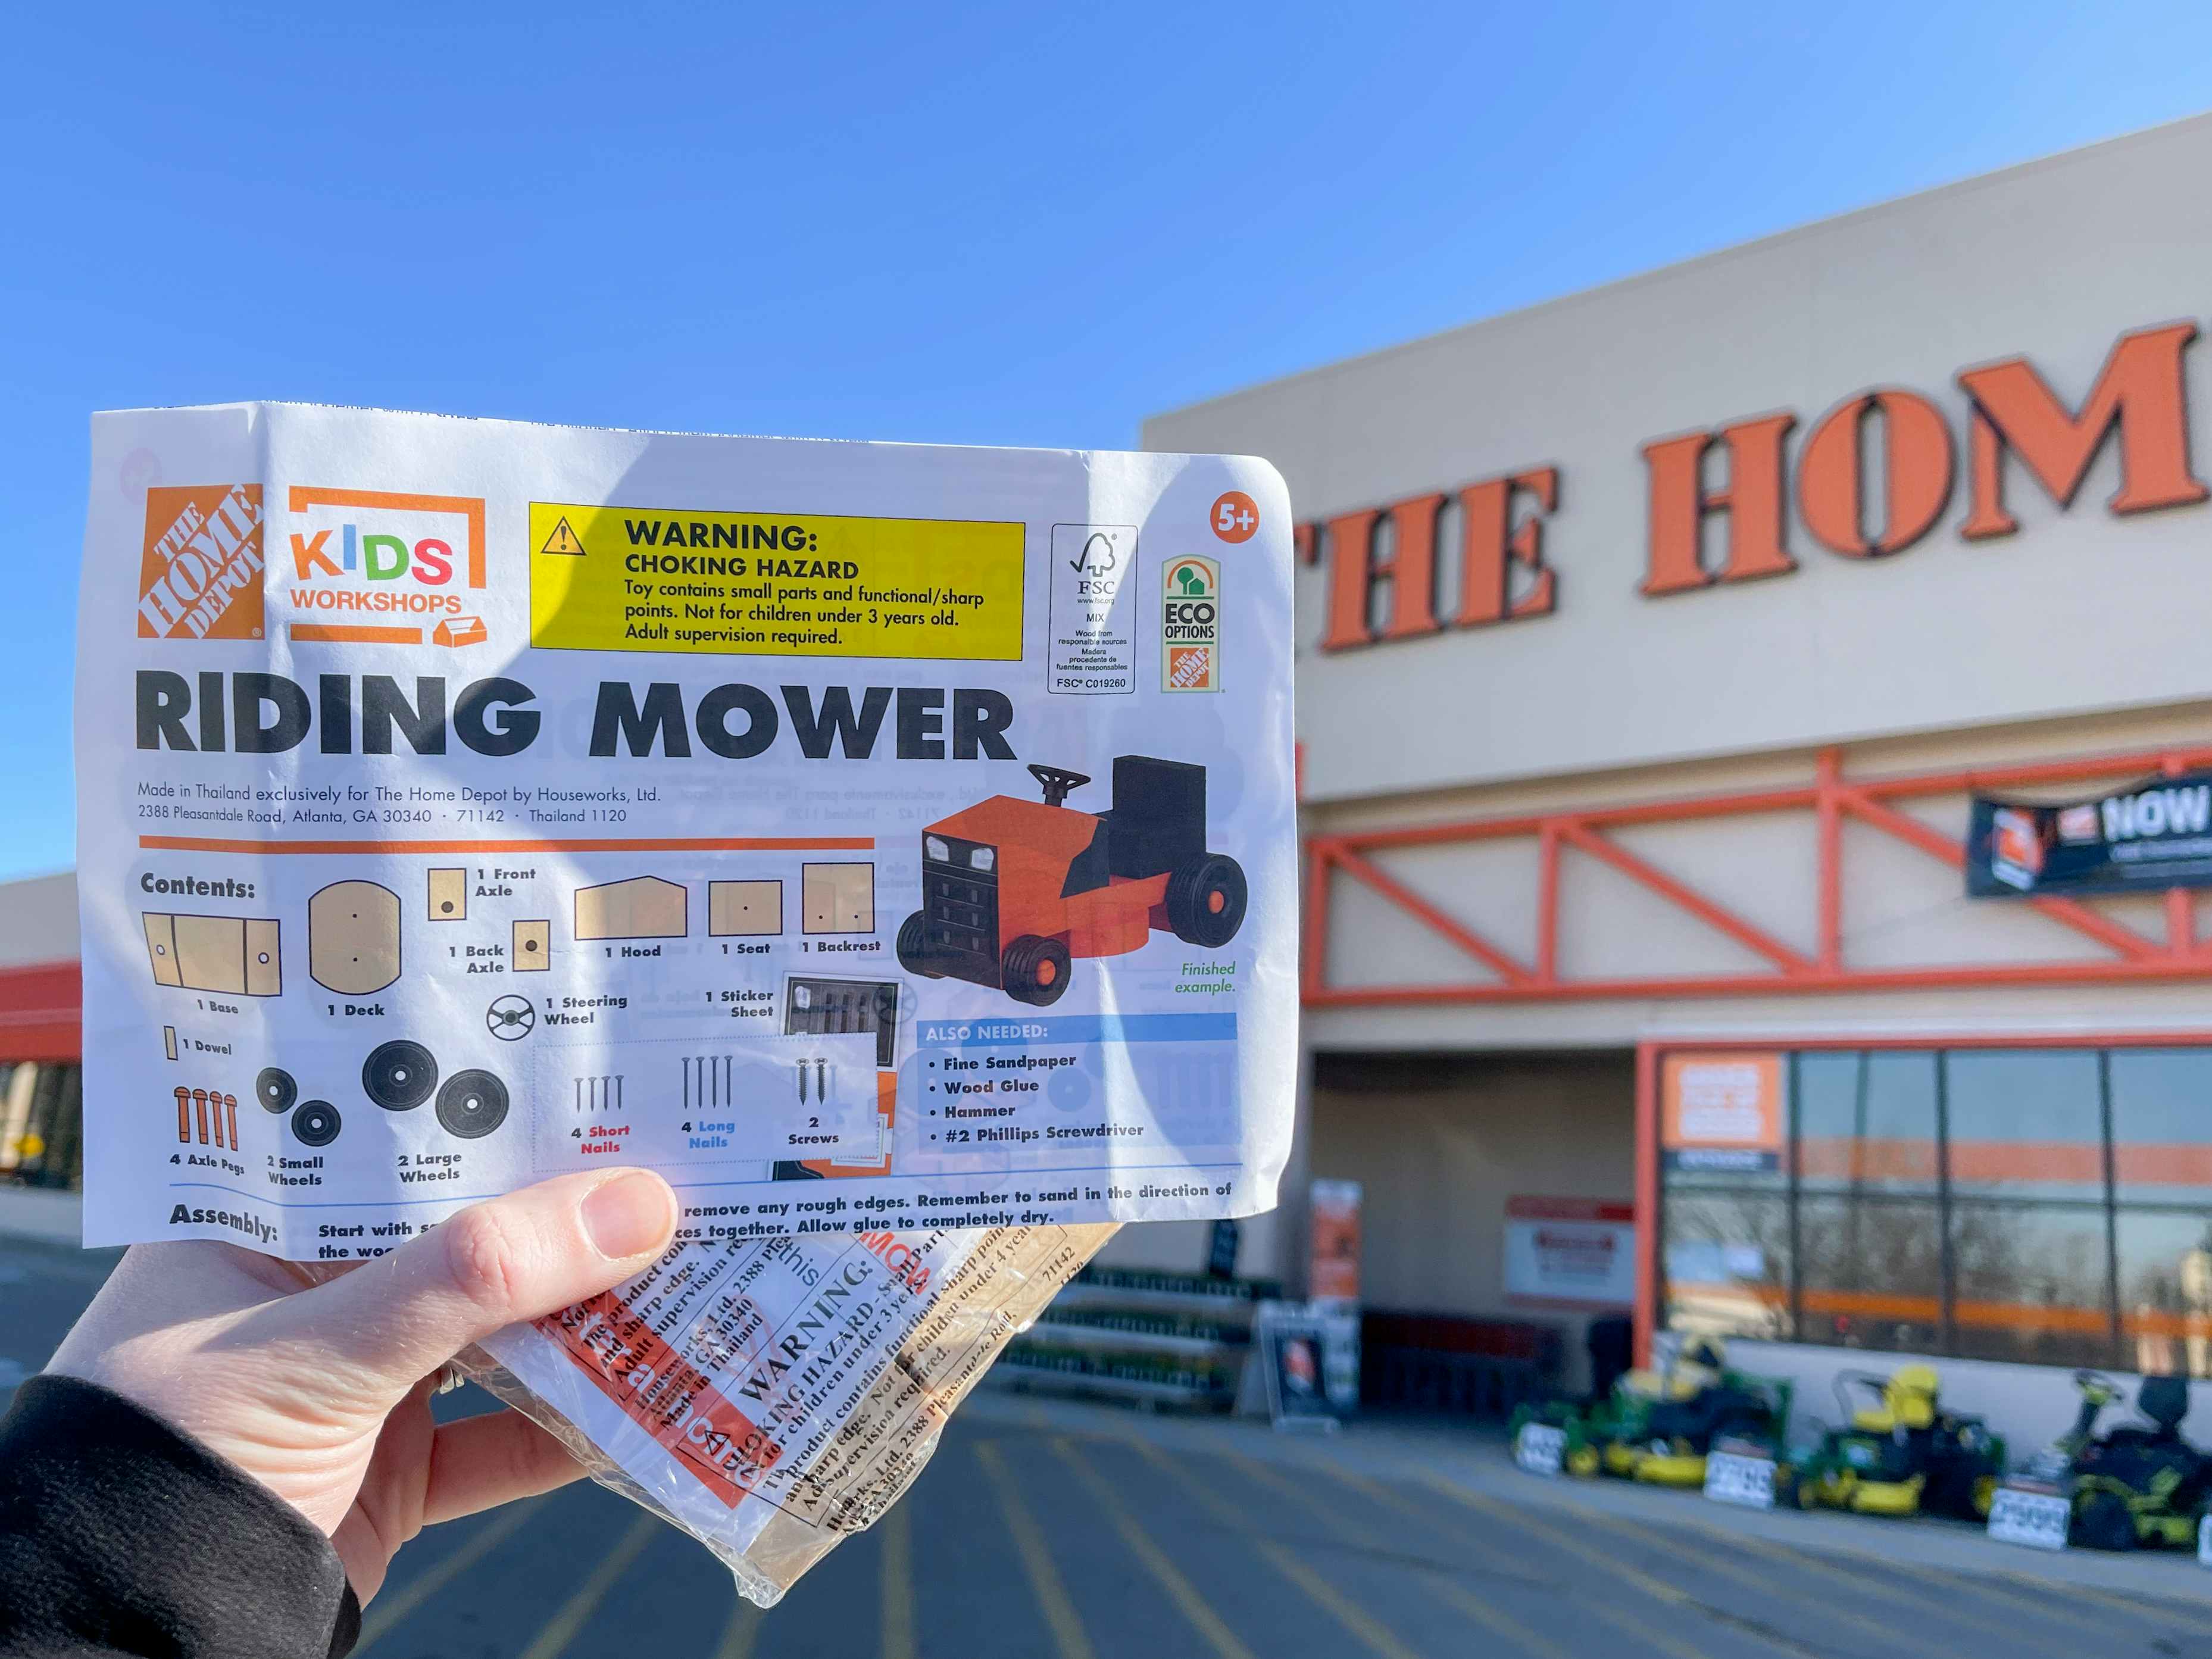 Free Kids Workshops Are Back at Home Depot Every First Saturday of